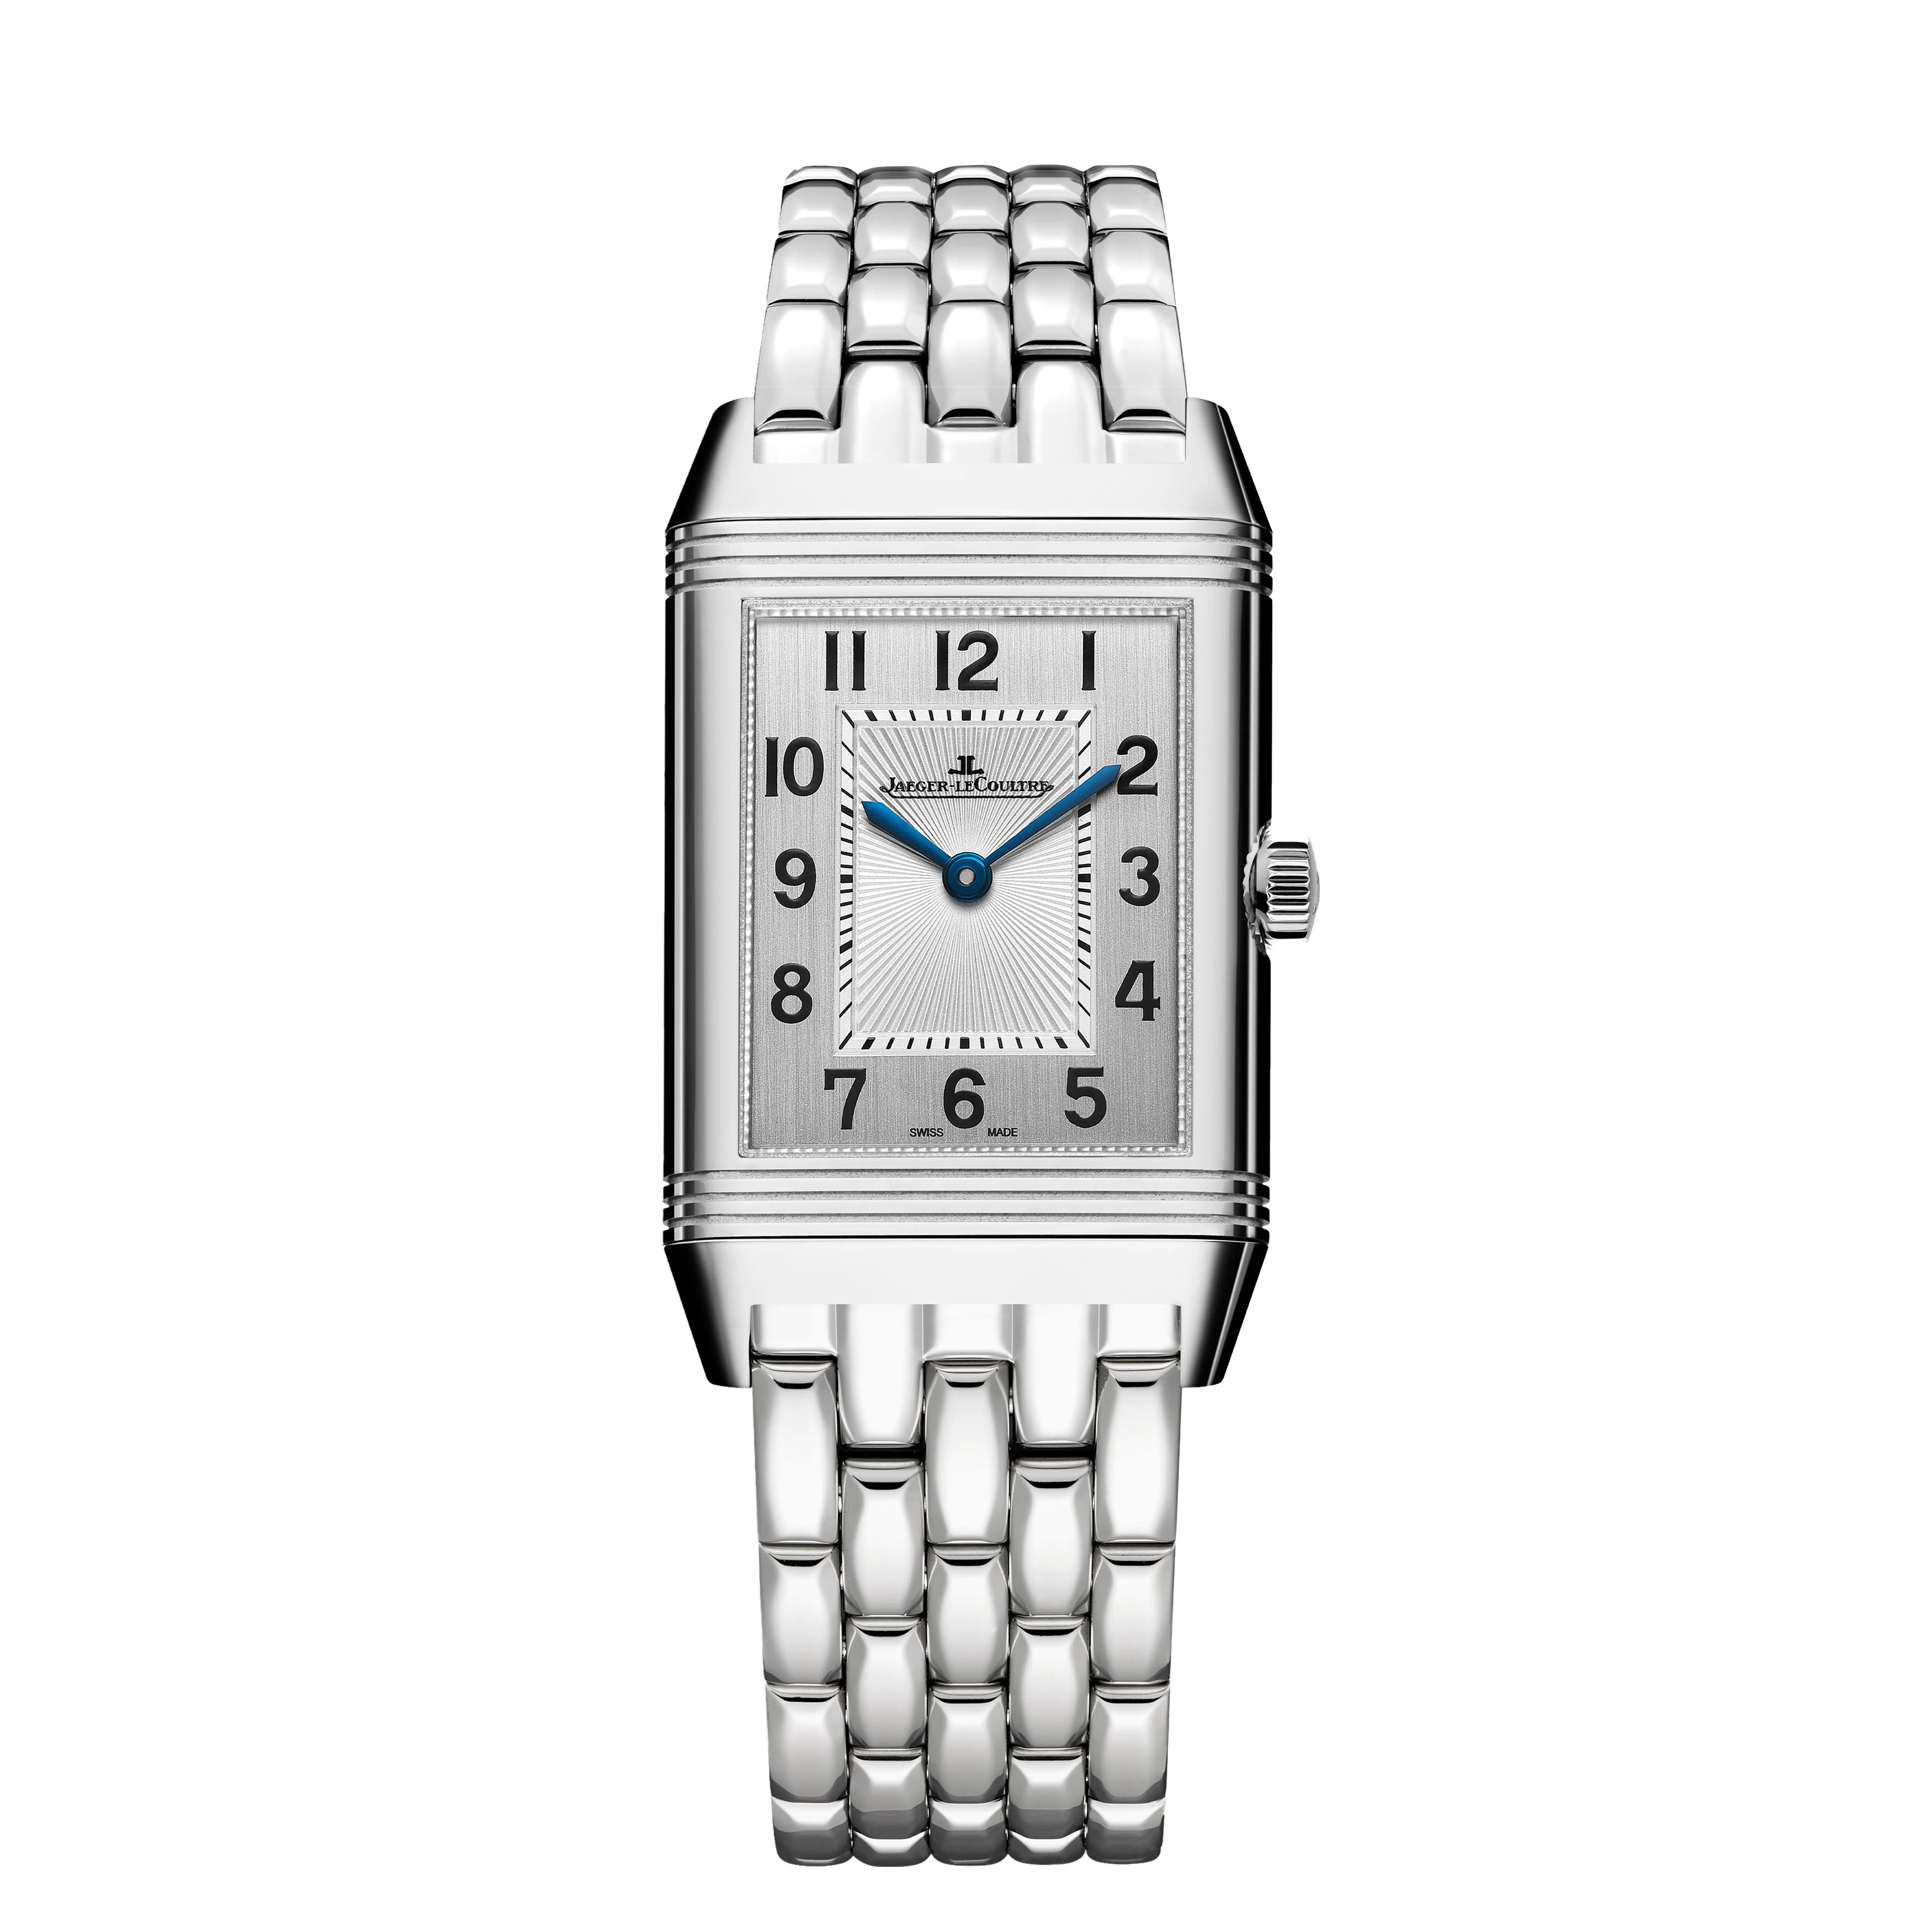 Jaeger-LeCoultre Reverso Classic Duetto Watch, 40x24mm Silver Dial, Q2588120